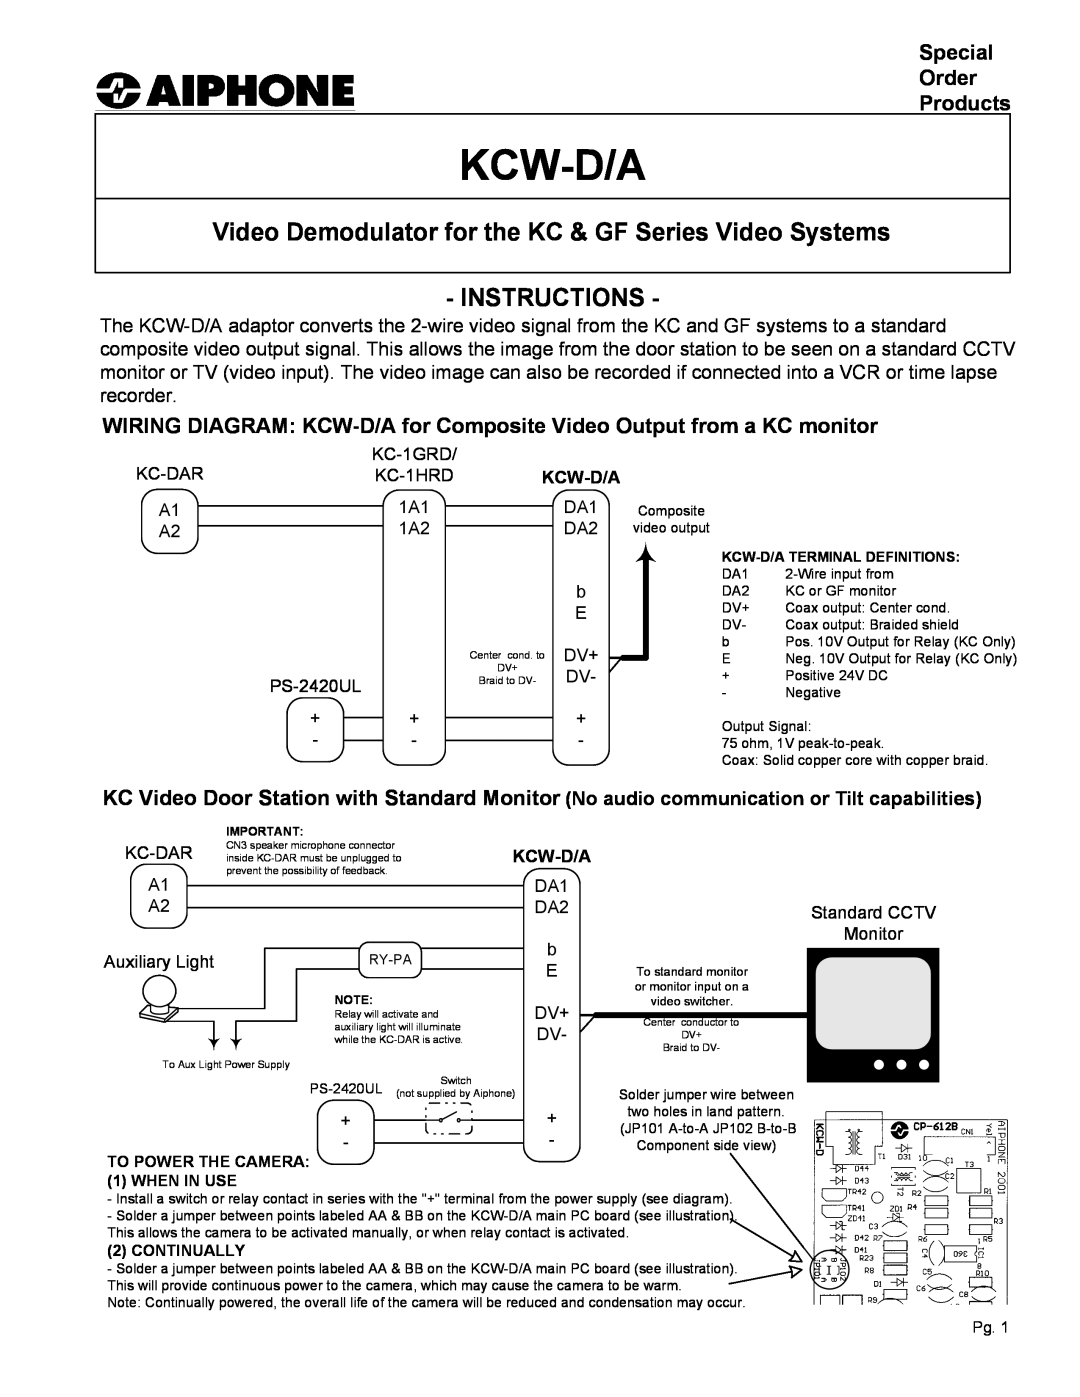 Aiphone manual Special Order Products, WIRING DIAGRAM KCW-D/A for Composite Video Output from a KC monitor, Kcw-D/A 